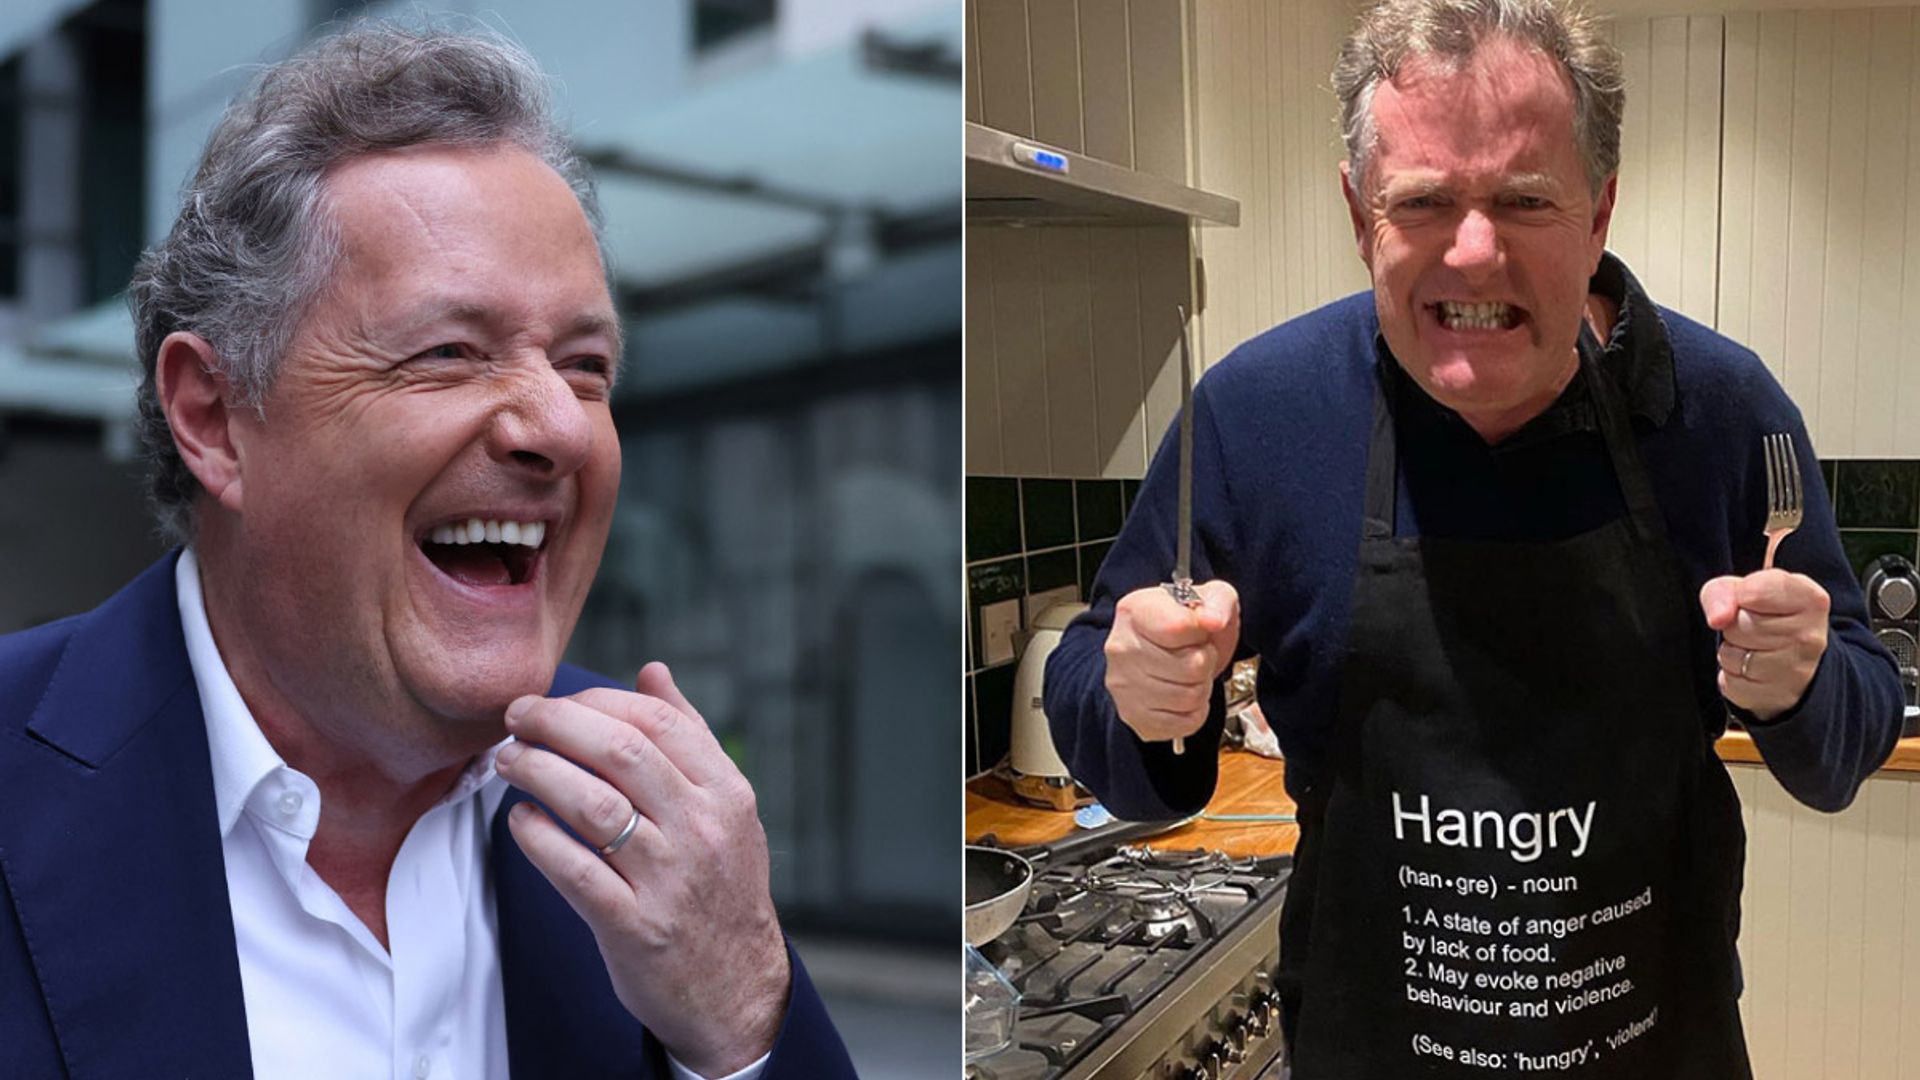 Piers Morgan's controversial UK homes divide fans – see inside